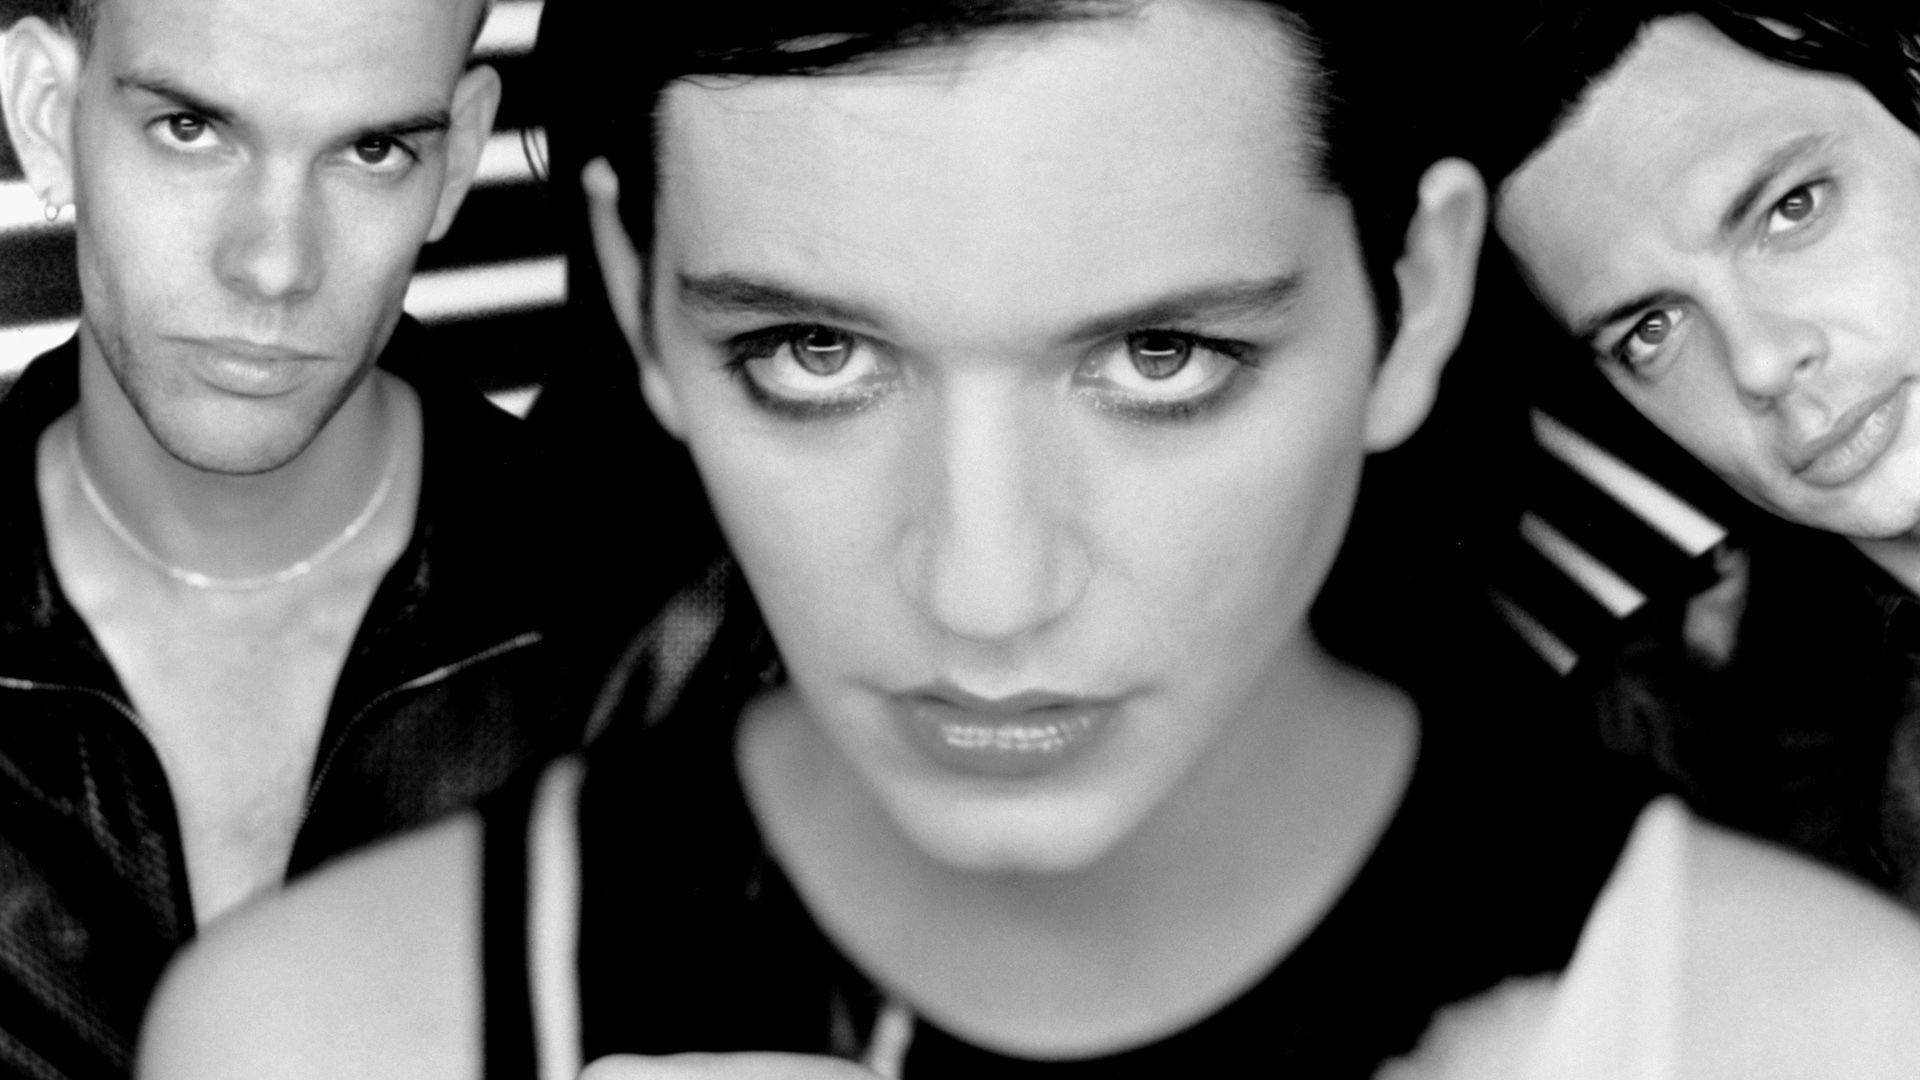 Placebo: Sleeping with Ghosts, 2003, Molko and Olsdal, Monochrome. 1920x1080 Full HD Wallpaper.